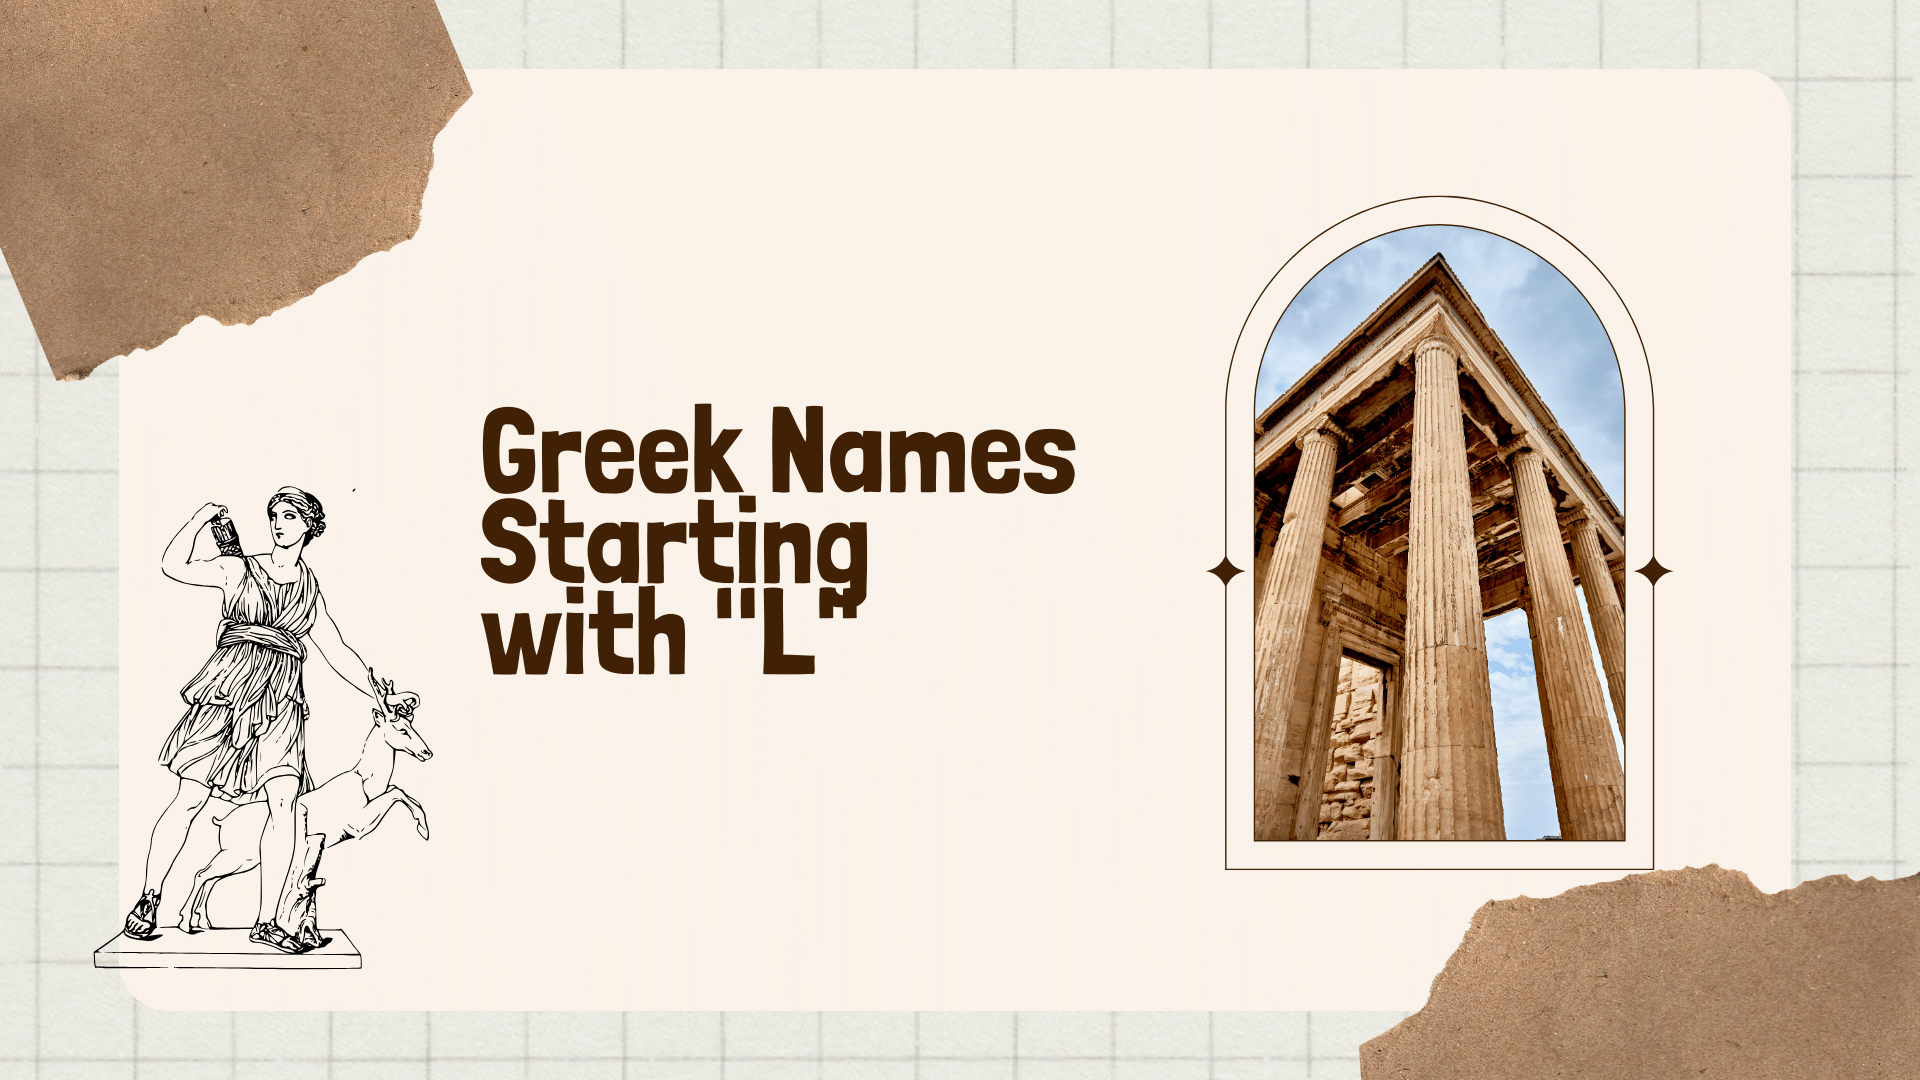 Greek Names Starting With "L"